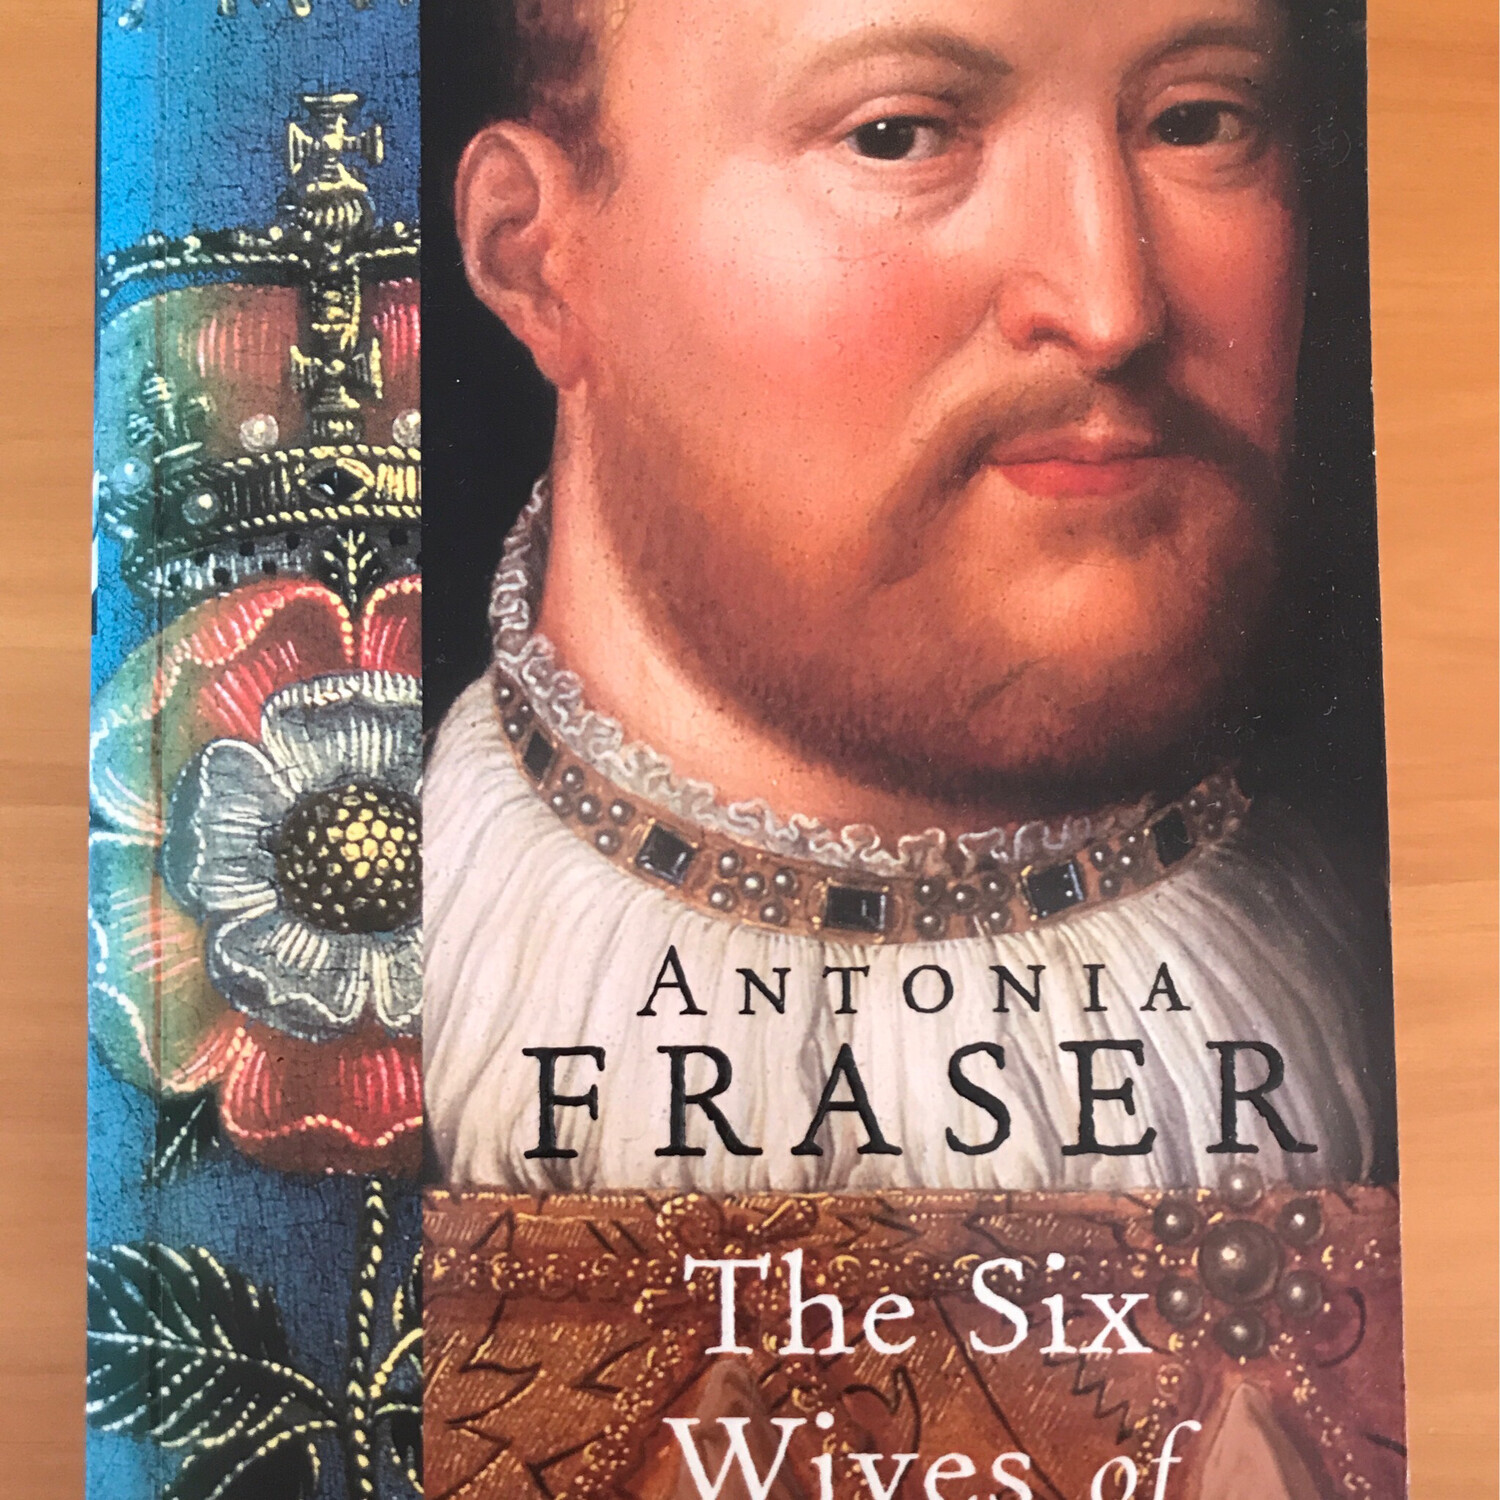 The Six Wives Of Henry VIII, Antonia Fraser